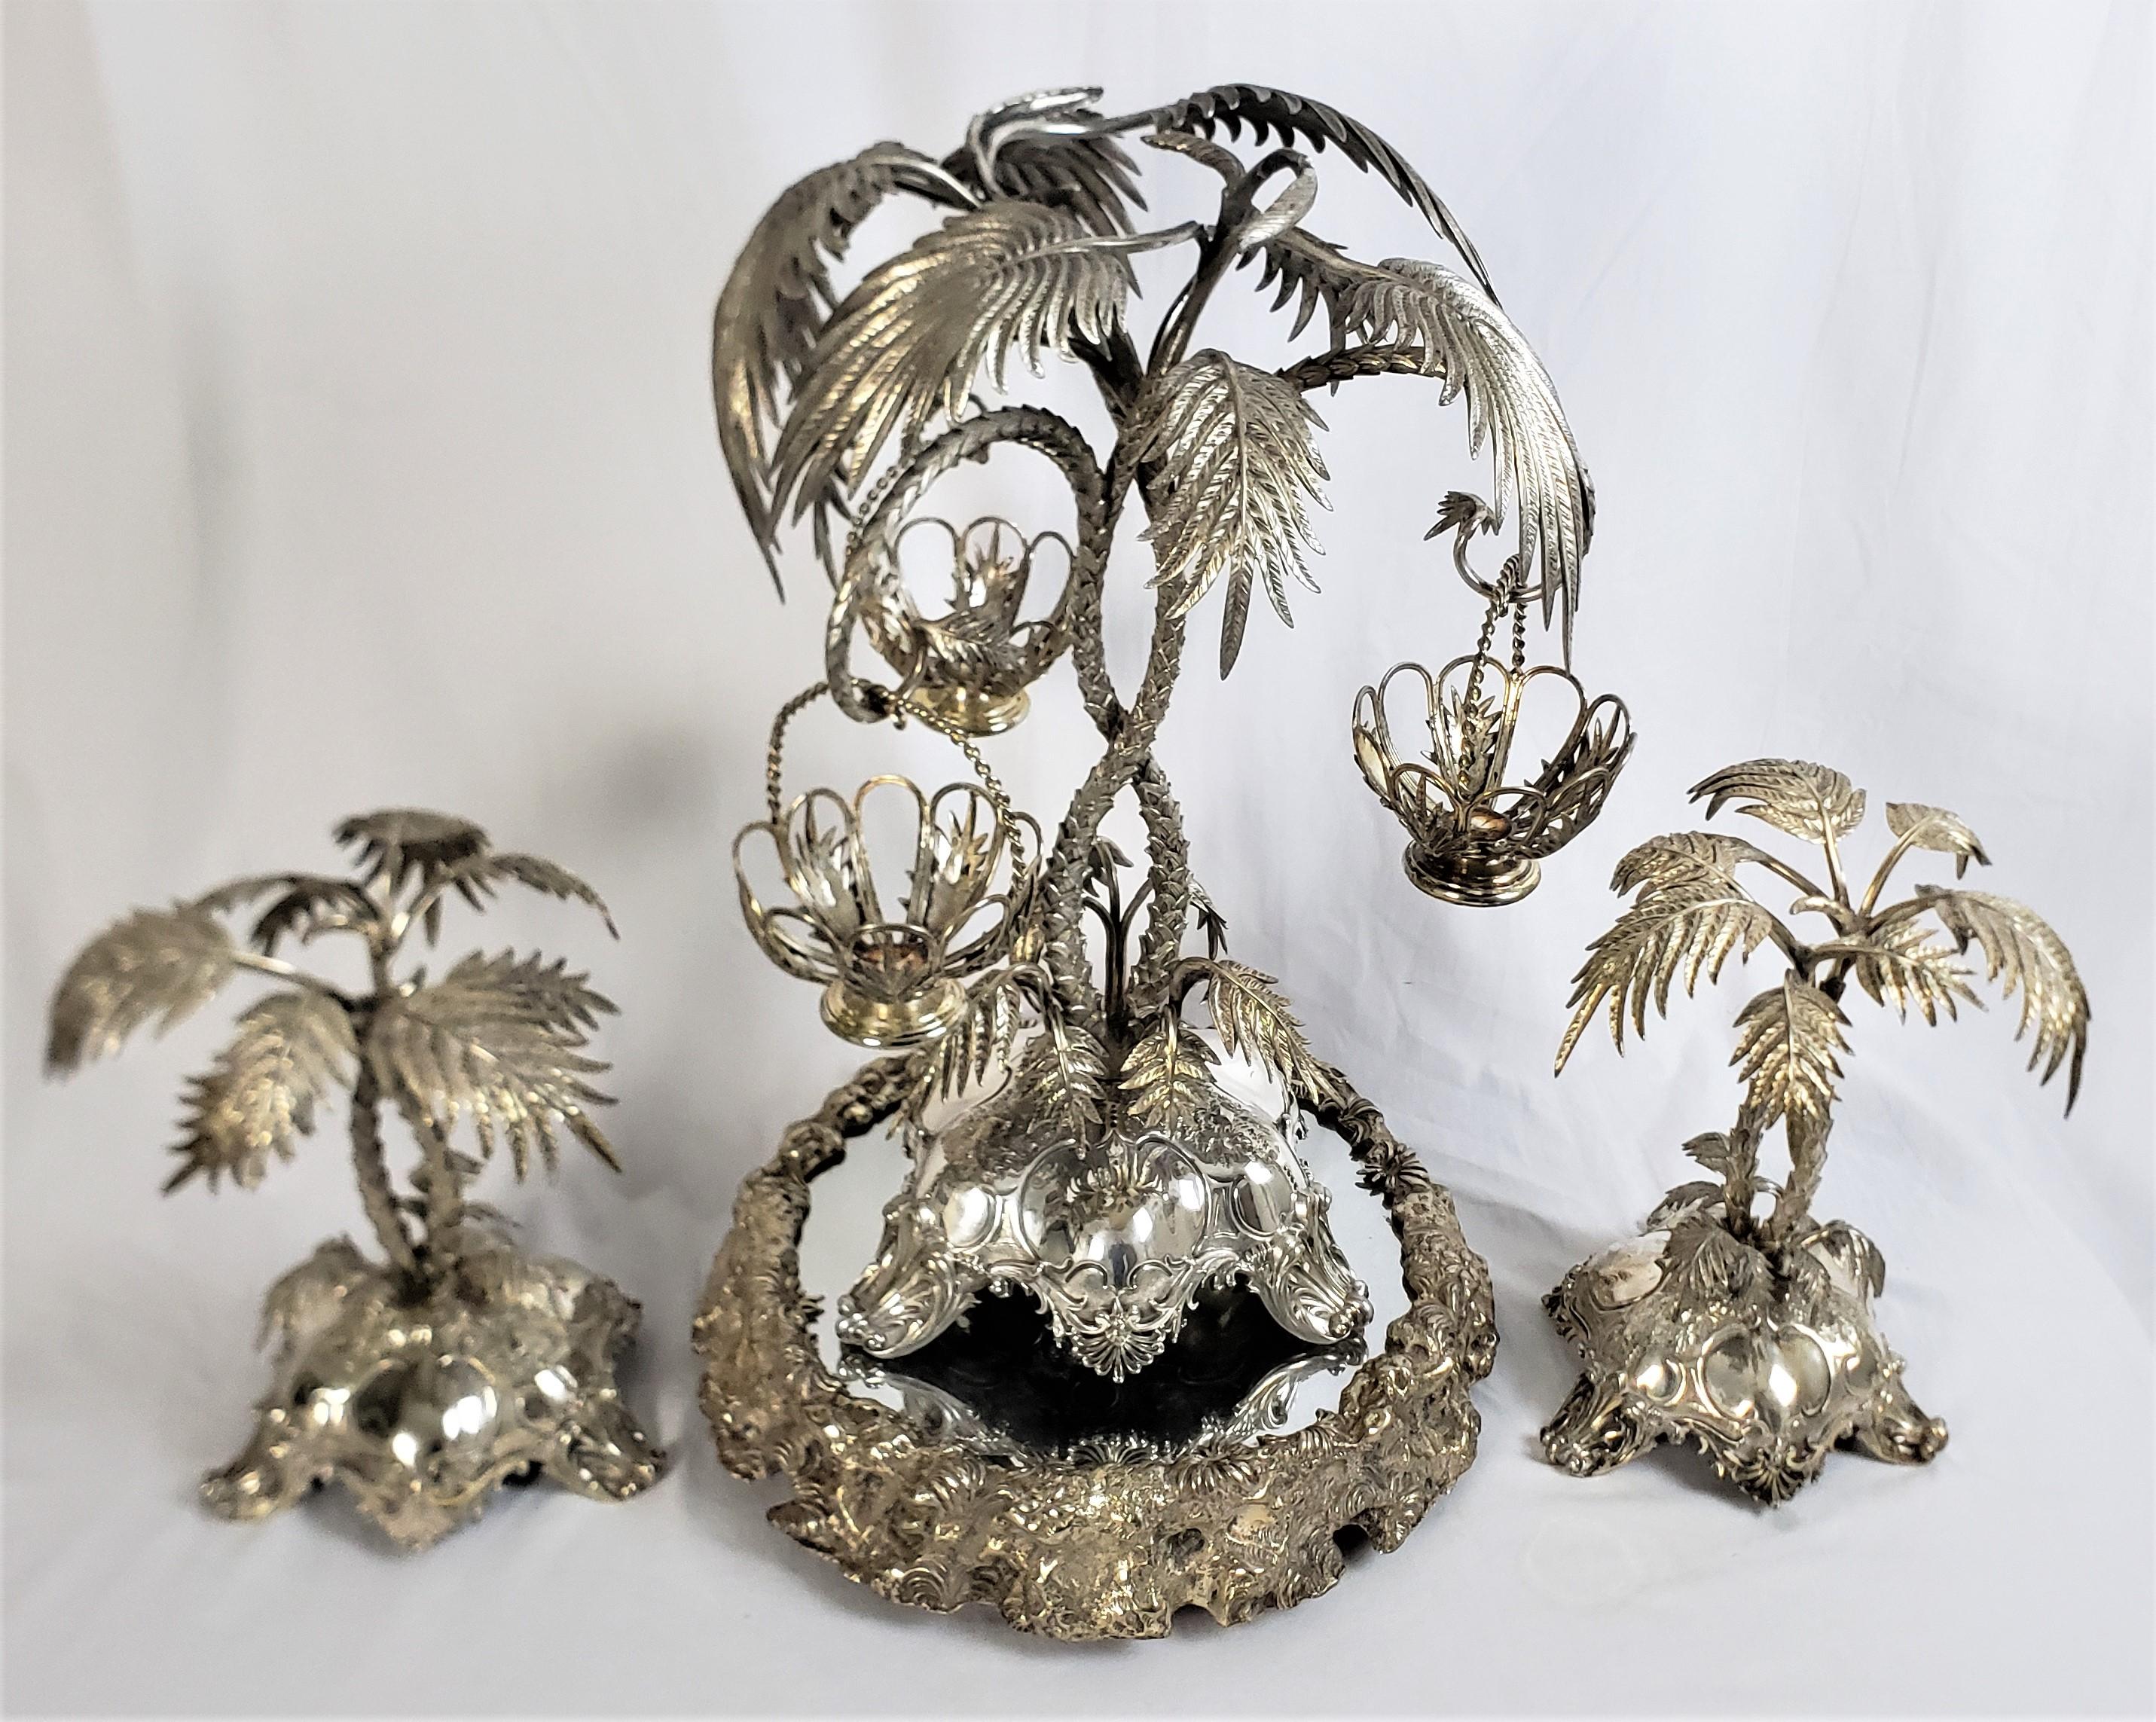 Huge Antique Silver Plated Anglo-Indian Styled Figural Palm Tree Centerpiece Set For Sale 2